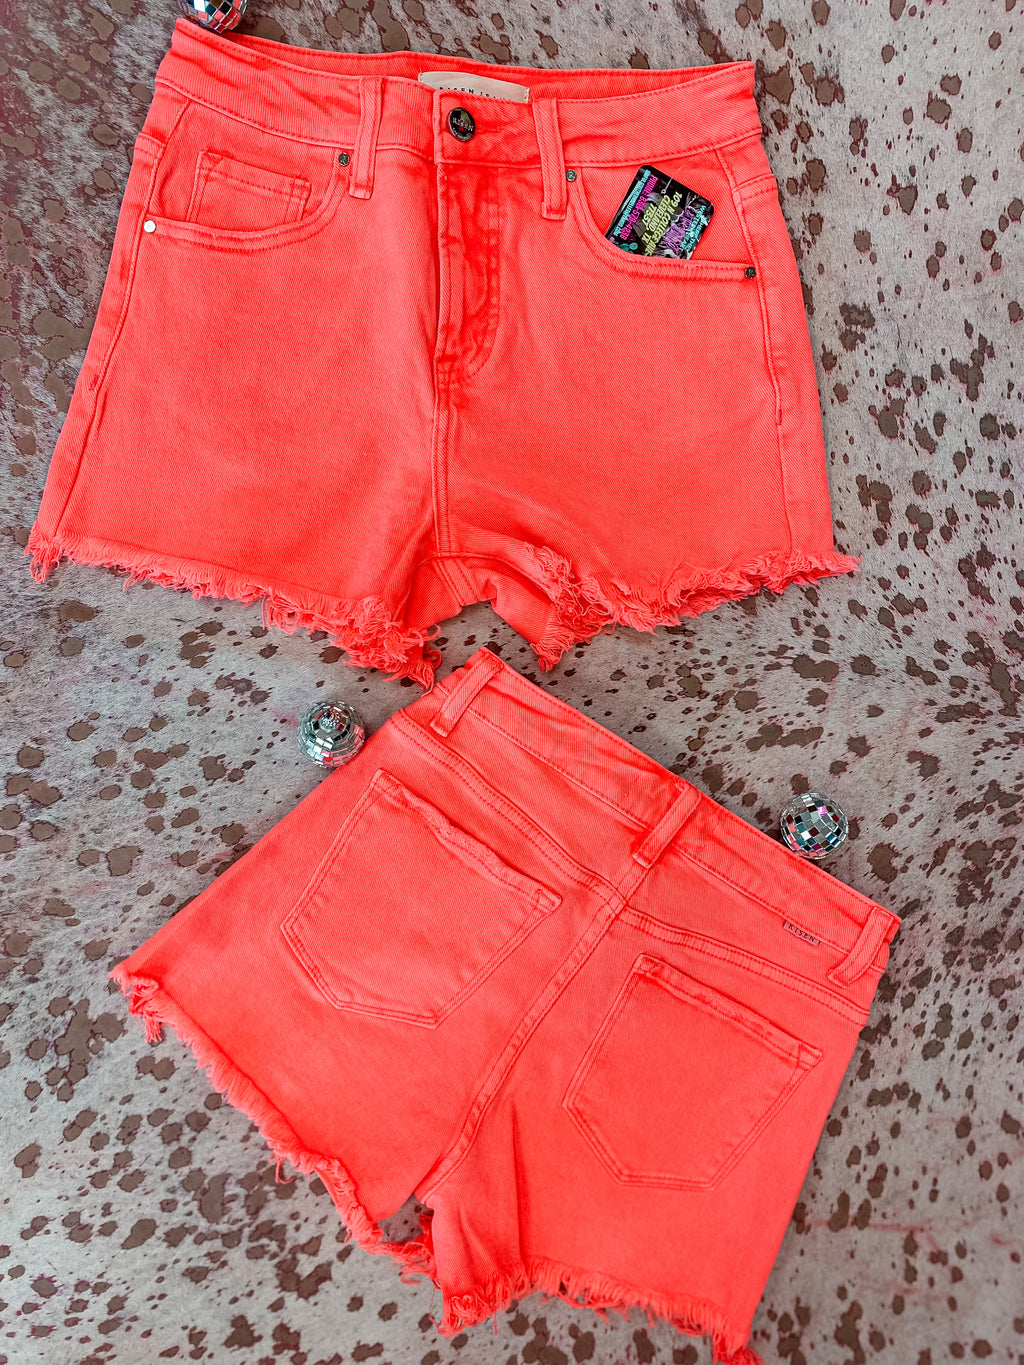 CHiRpY CoRaL ShOrTs